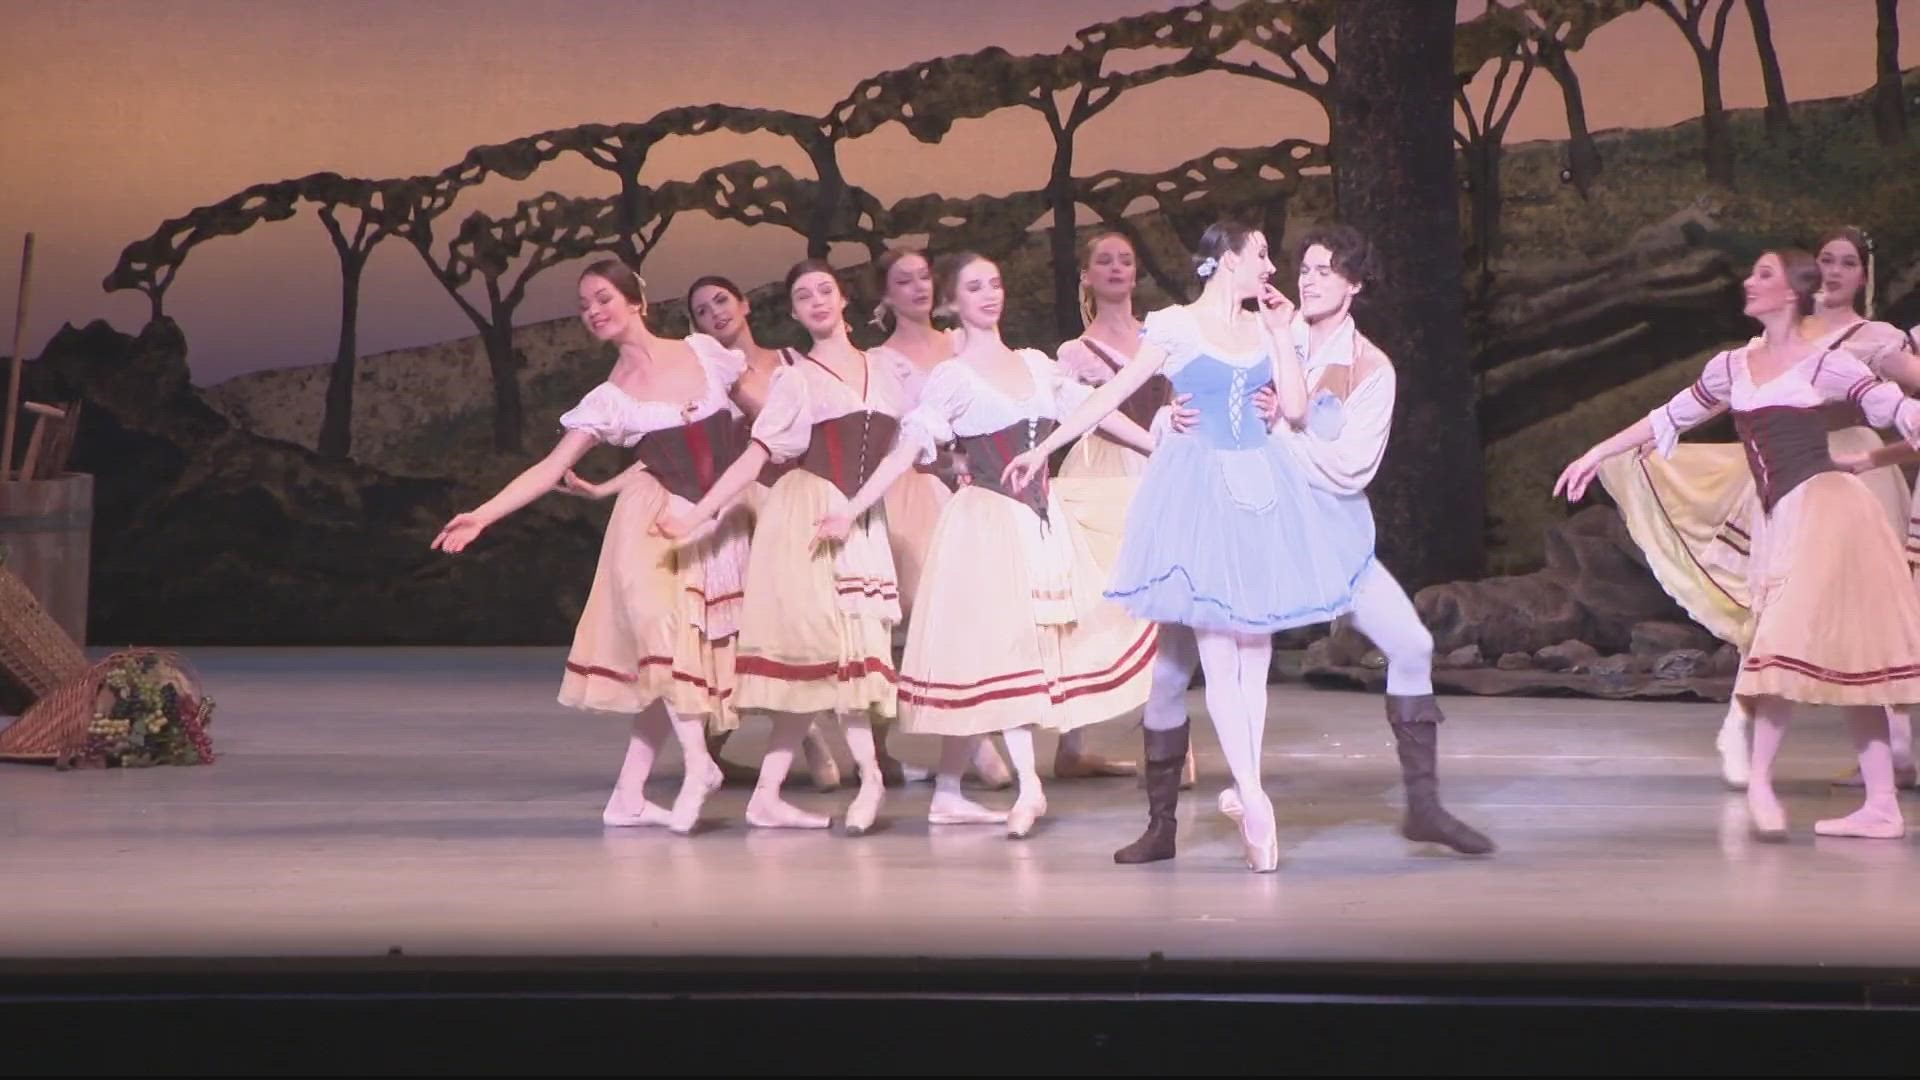 The United Ukrainian Ballet company made its U.S. debut Wednesday night at the Kennedy Center in Washington, D.C.